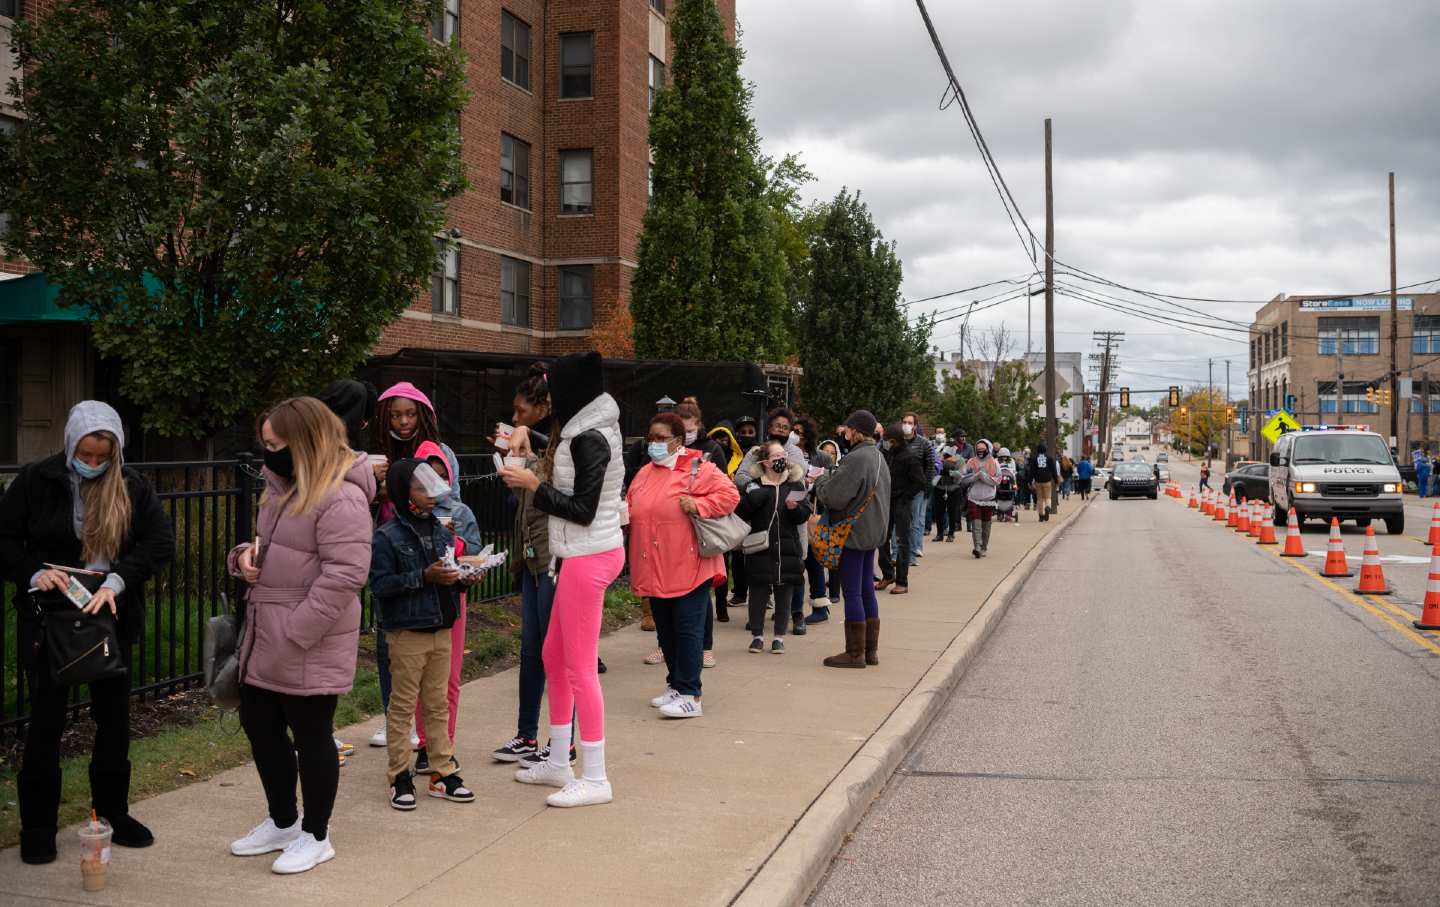 A line of voters stretches across a block on the left, while cars are seen driving down a road on the right.